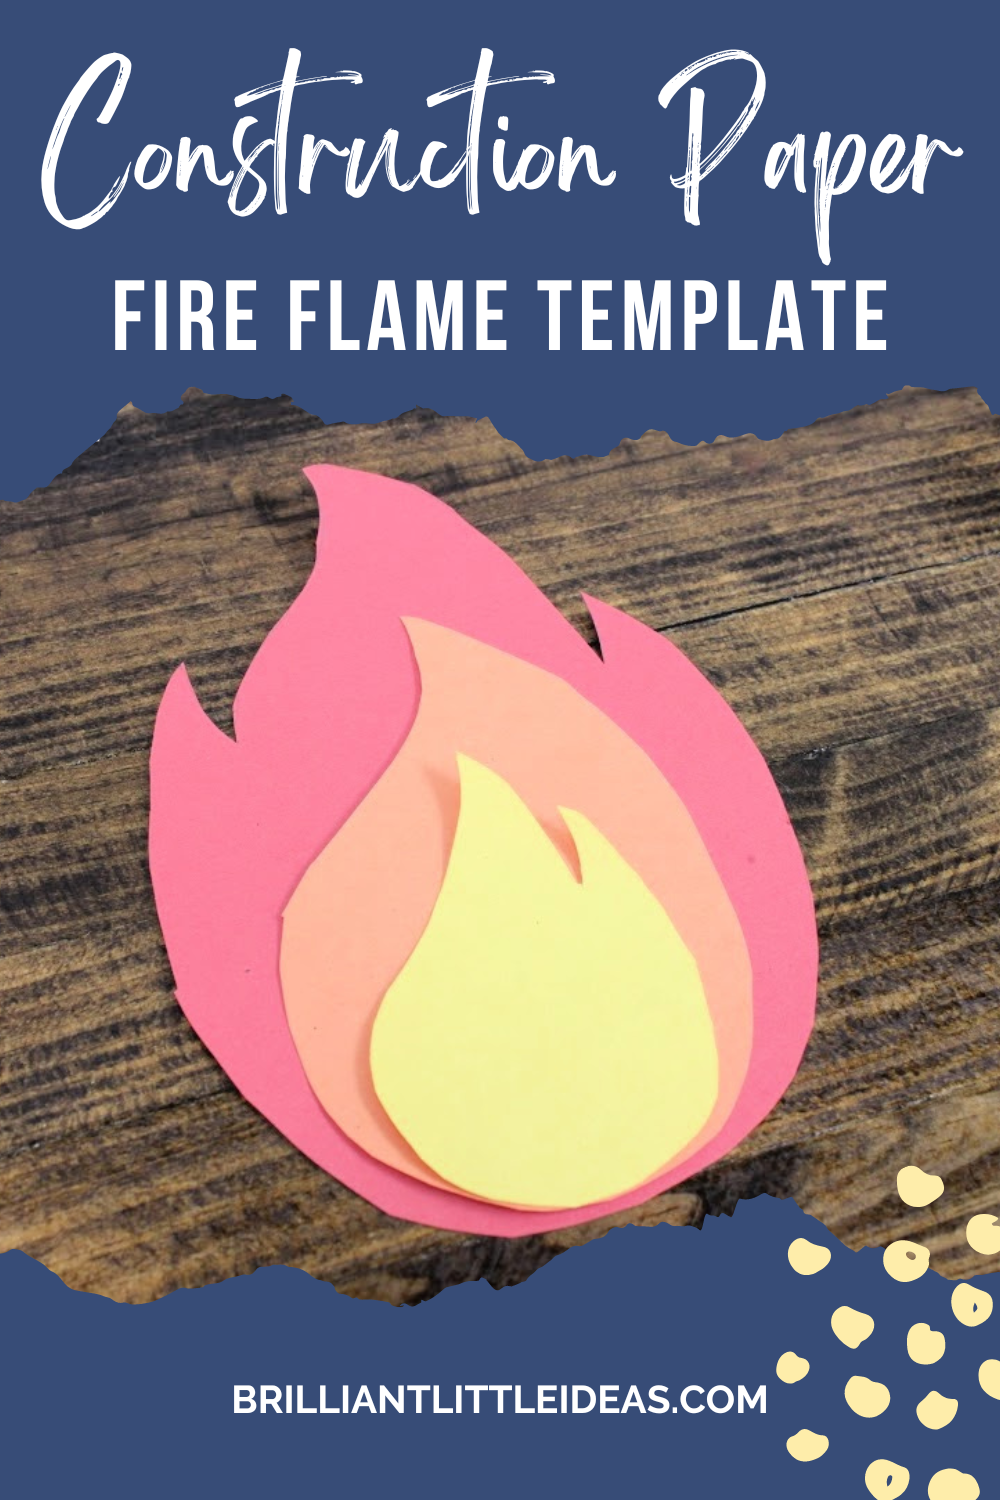 How to make construction paper fire flames with printable template brilliant little ideas